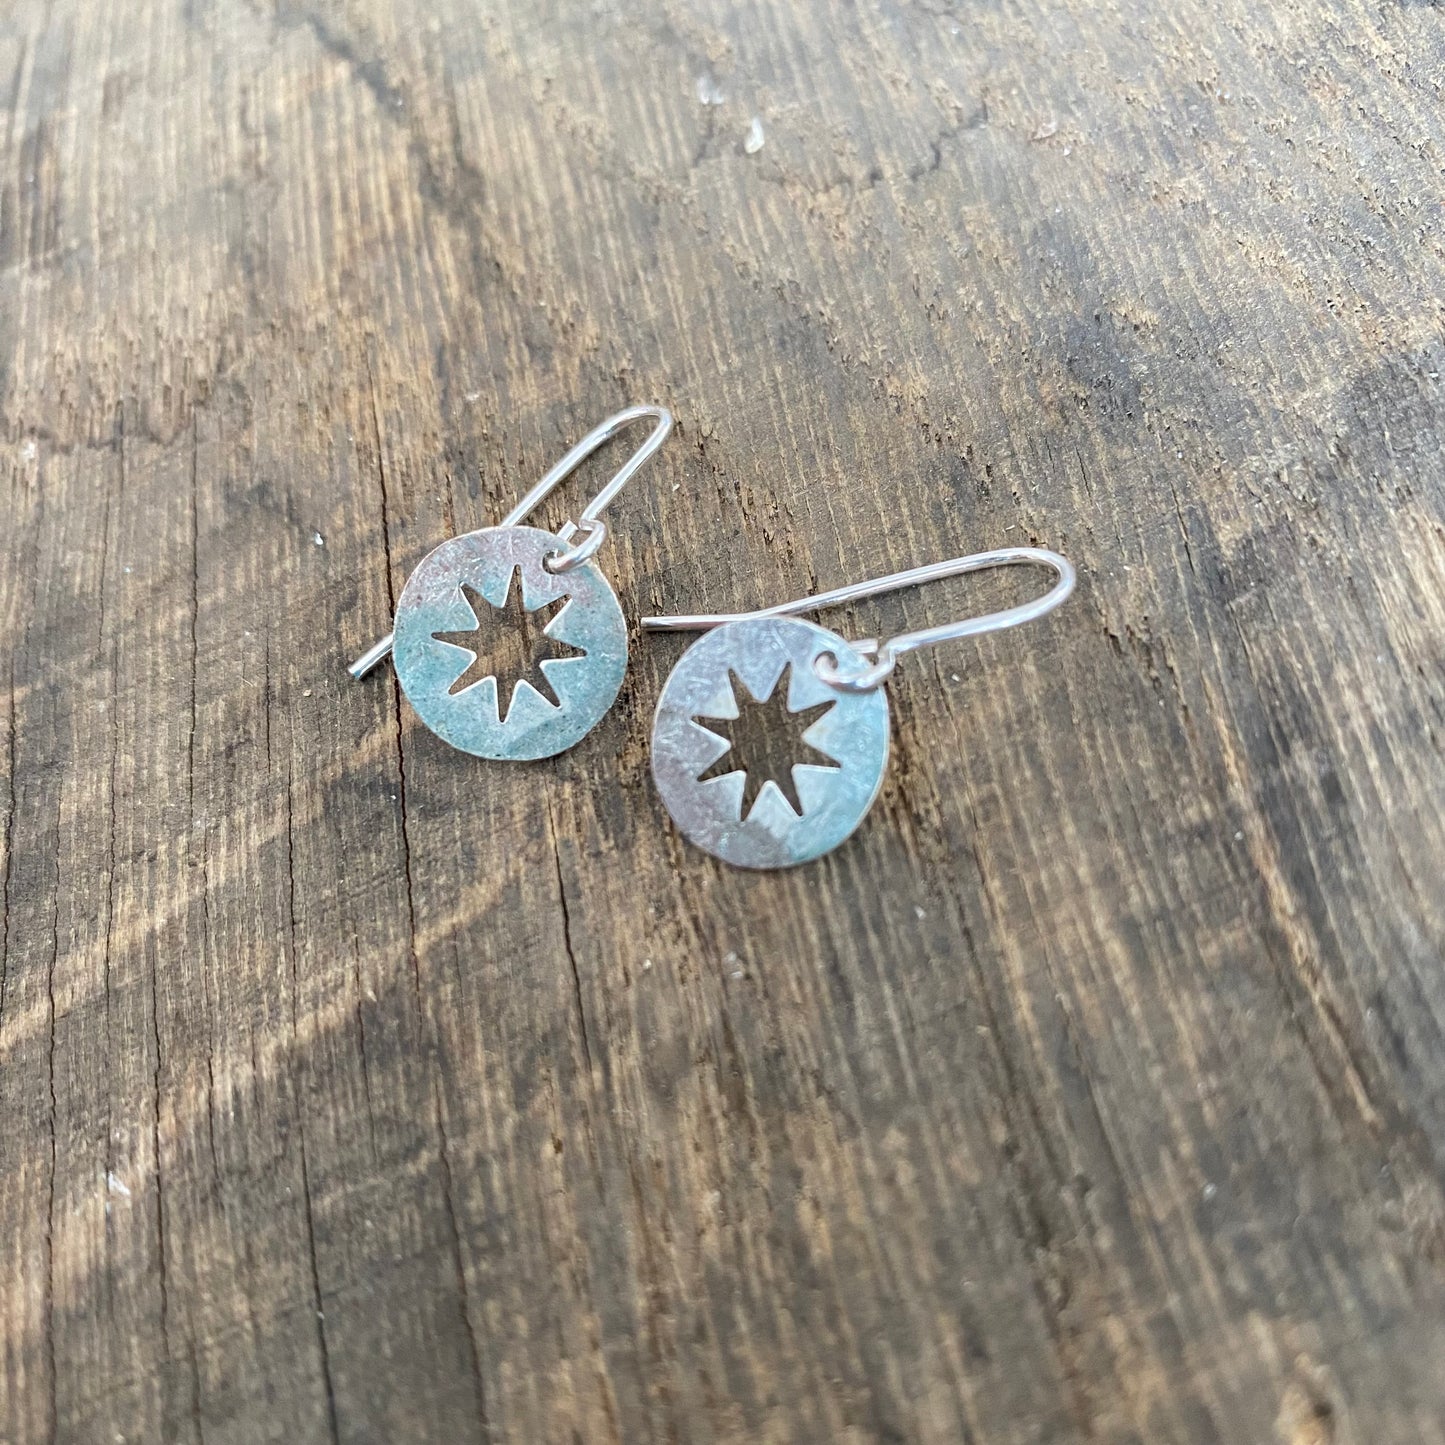 Hammered Silver Tone Star Cut Out Earrings